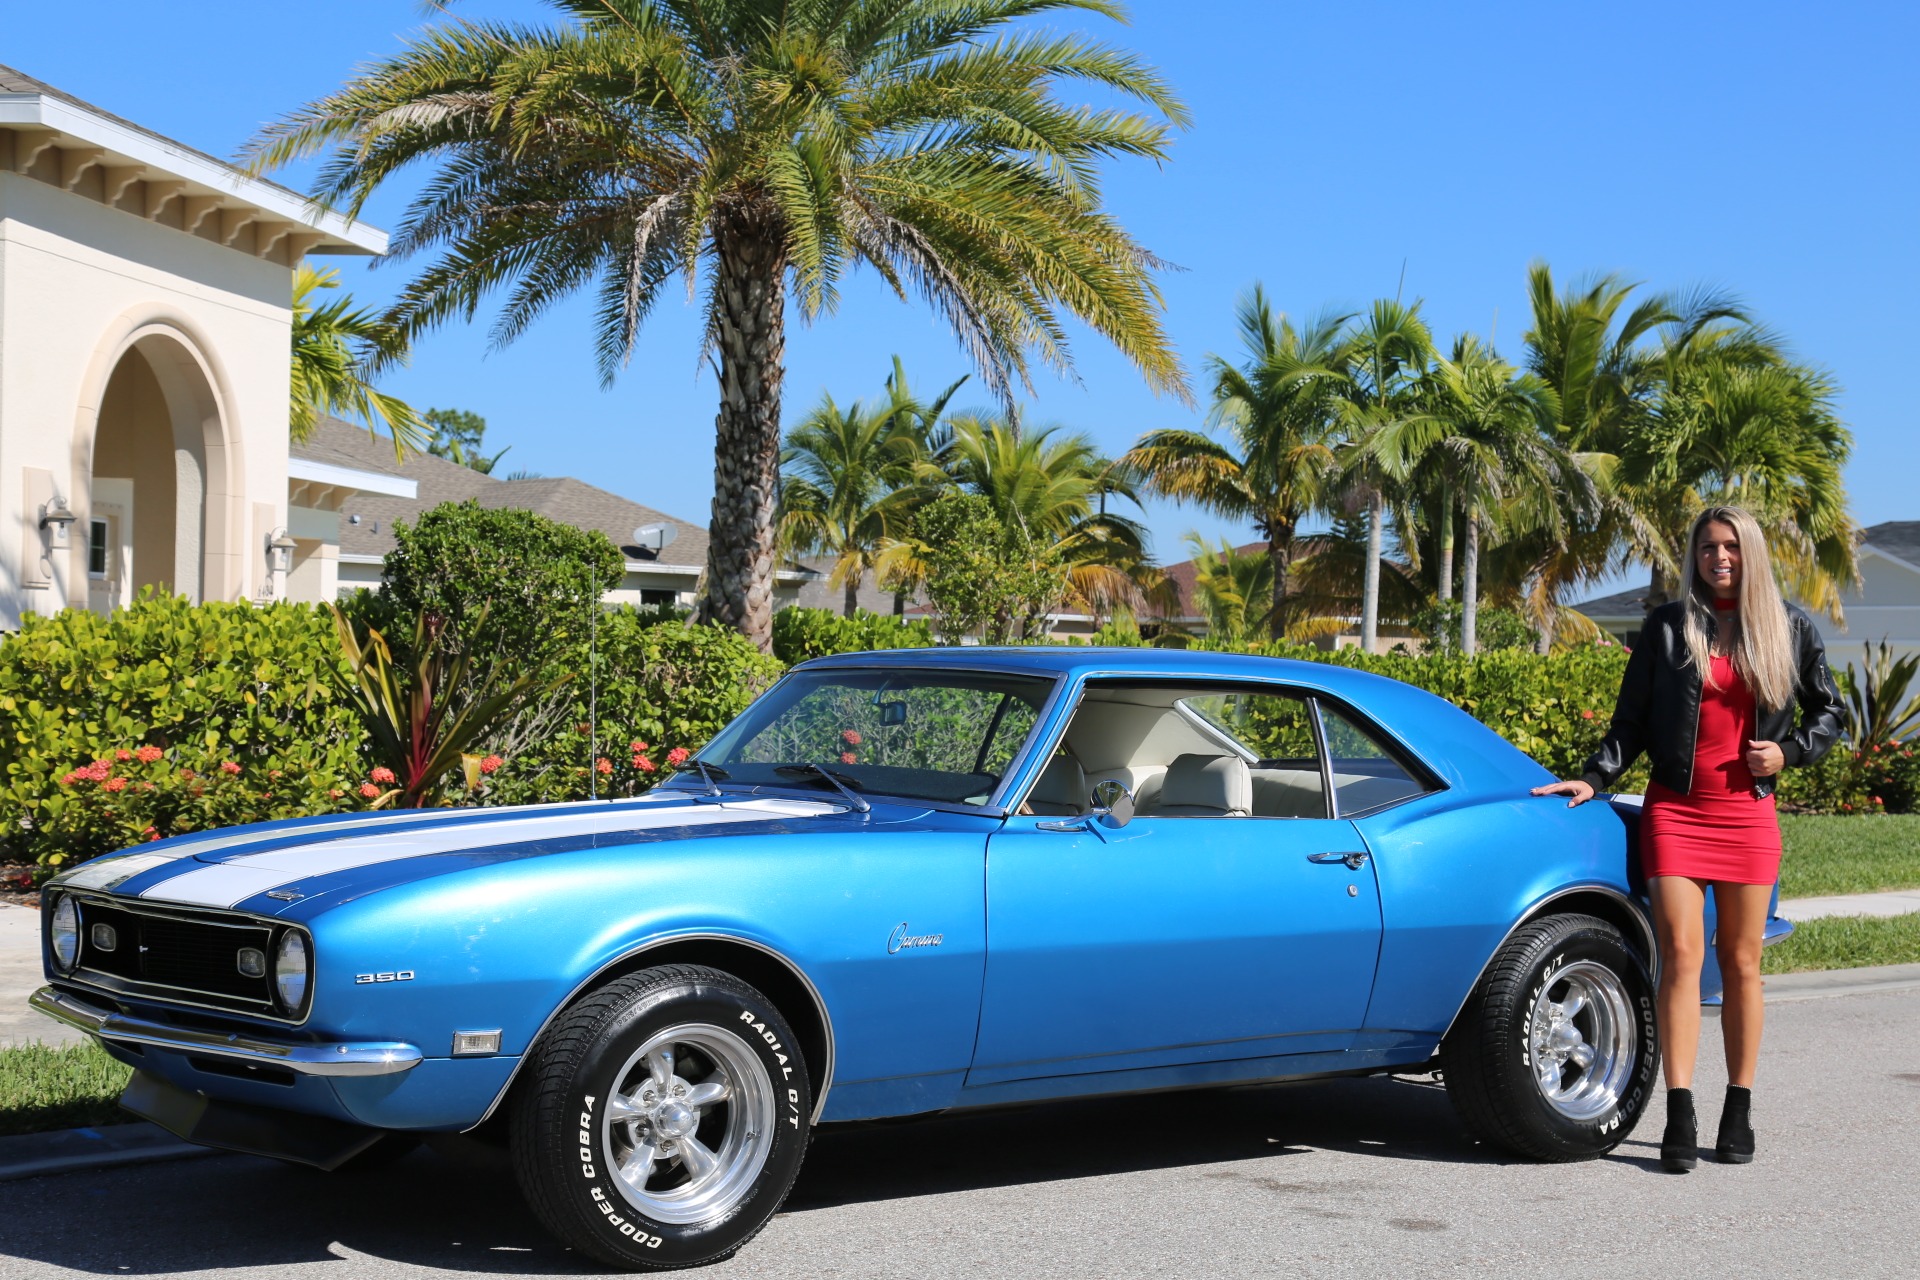 Used 1968 Chevy Camaro Coupe 4 Speed manual 350 stroked to 383 Engine AC for sale Sold at Muscle Cars for Sale Inc. in Fort Myers FL 33912 6